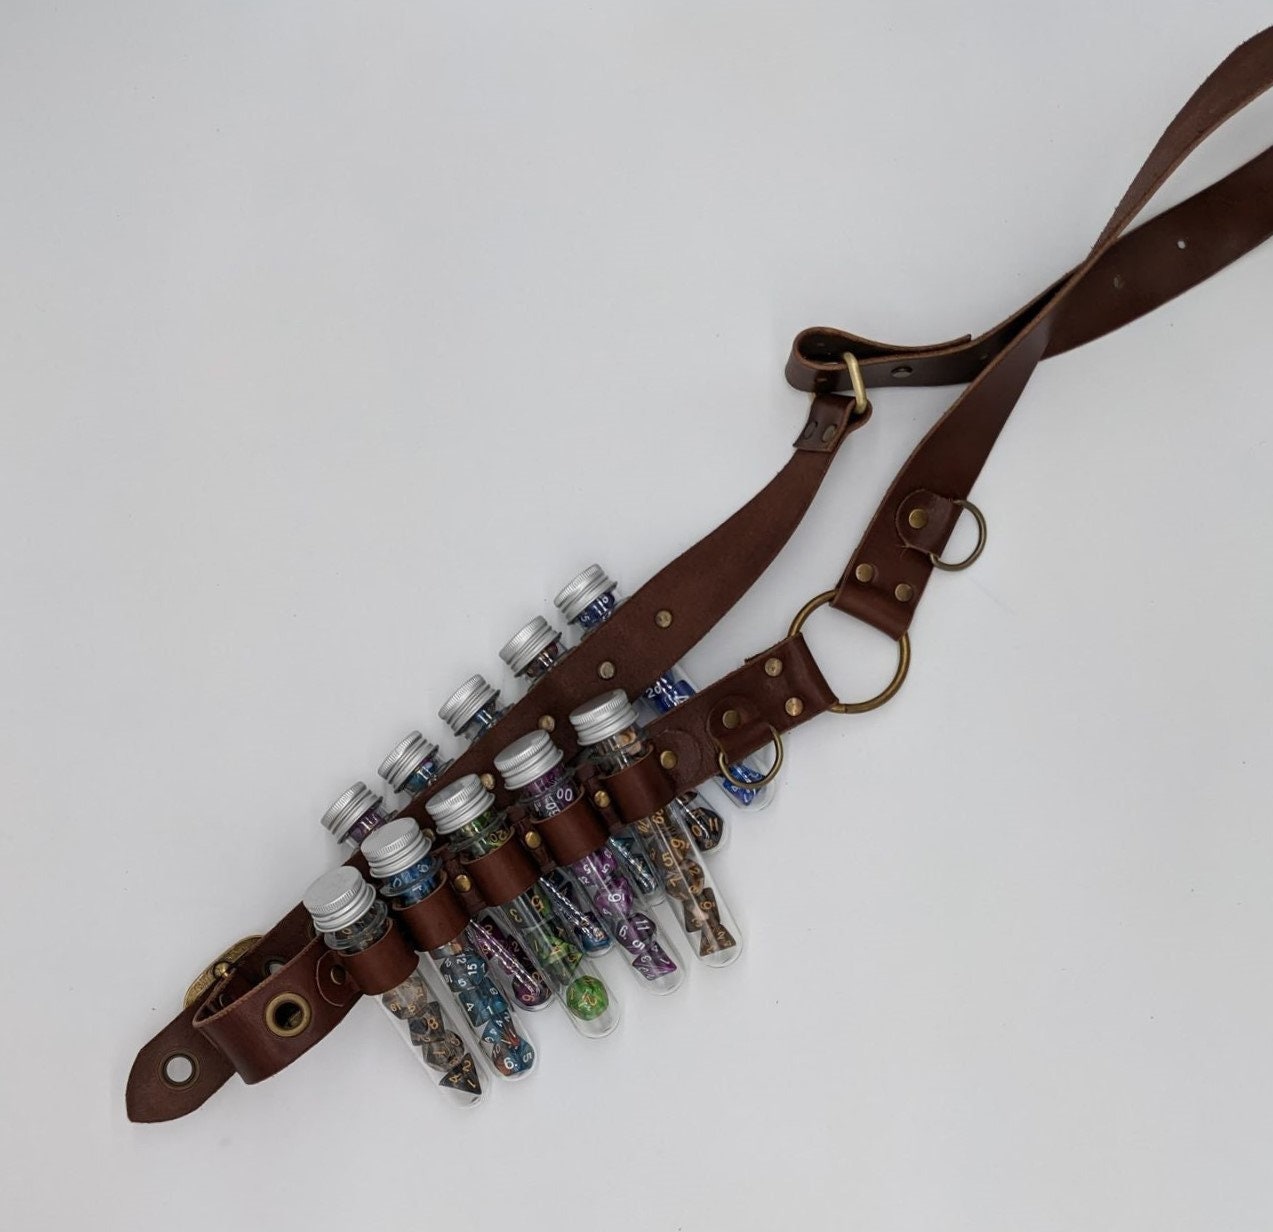 Bandolier / Utility Belt System for Steampunk Adventurers Faux Leather 